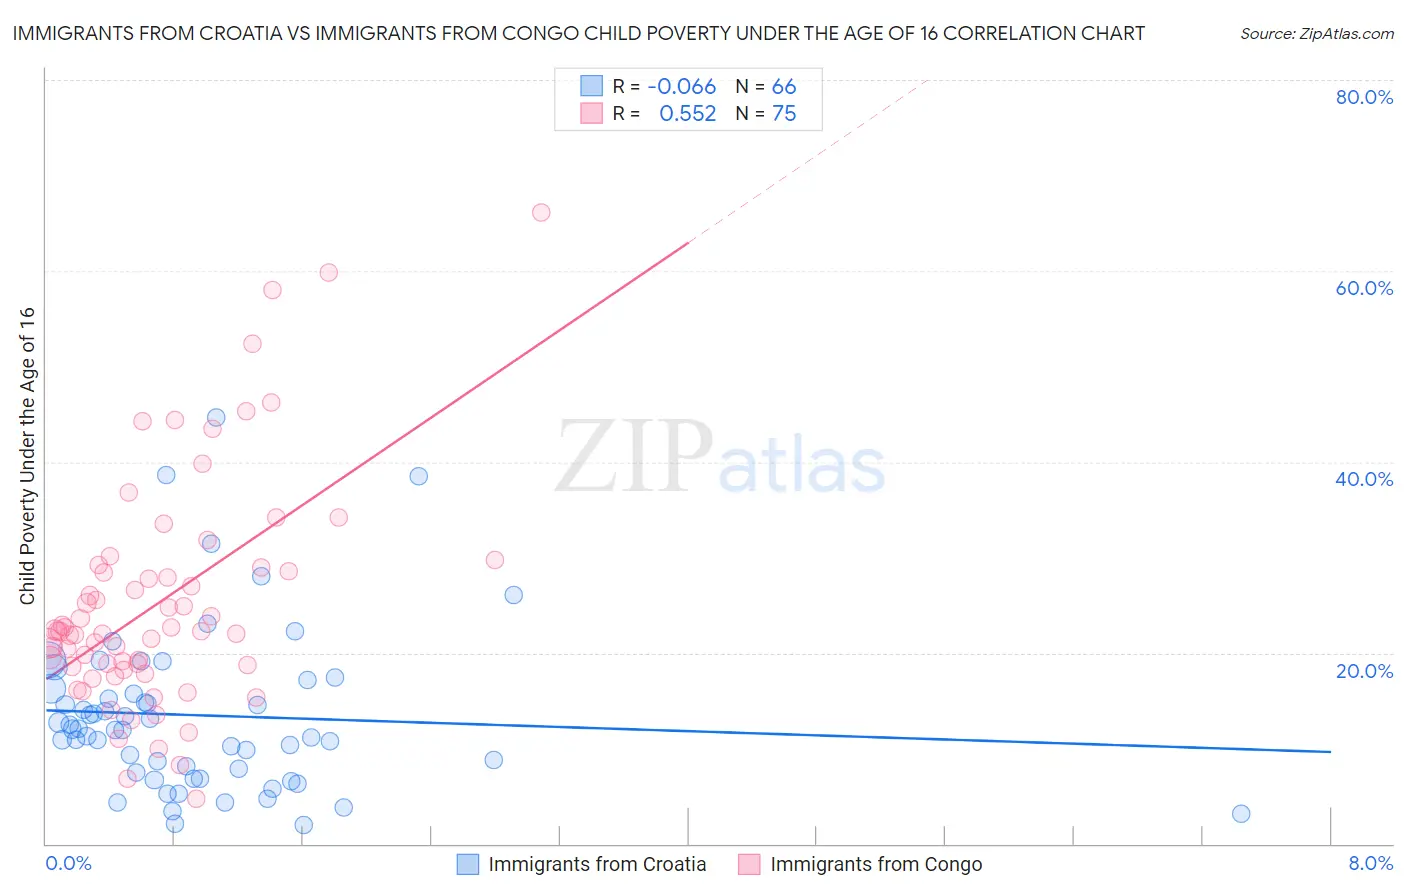 Immigrants from Croatia vs Immigrants from Congo Child Poverty Under the Age of 16